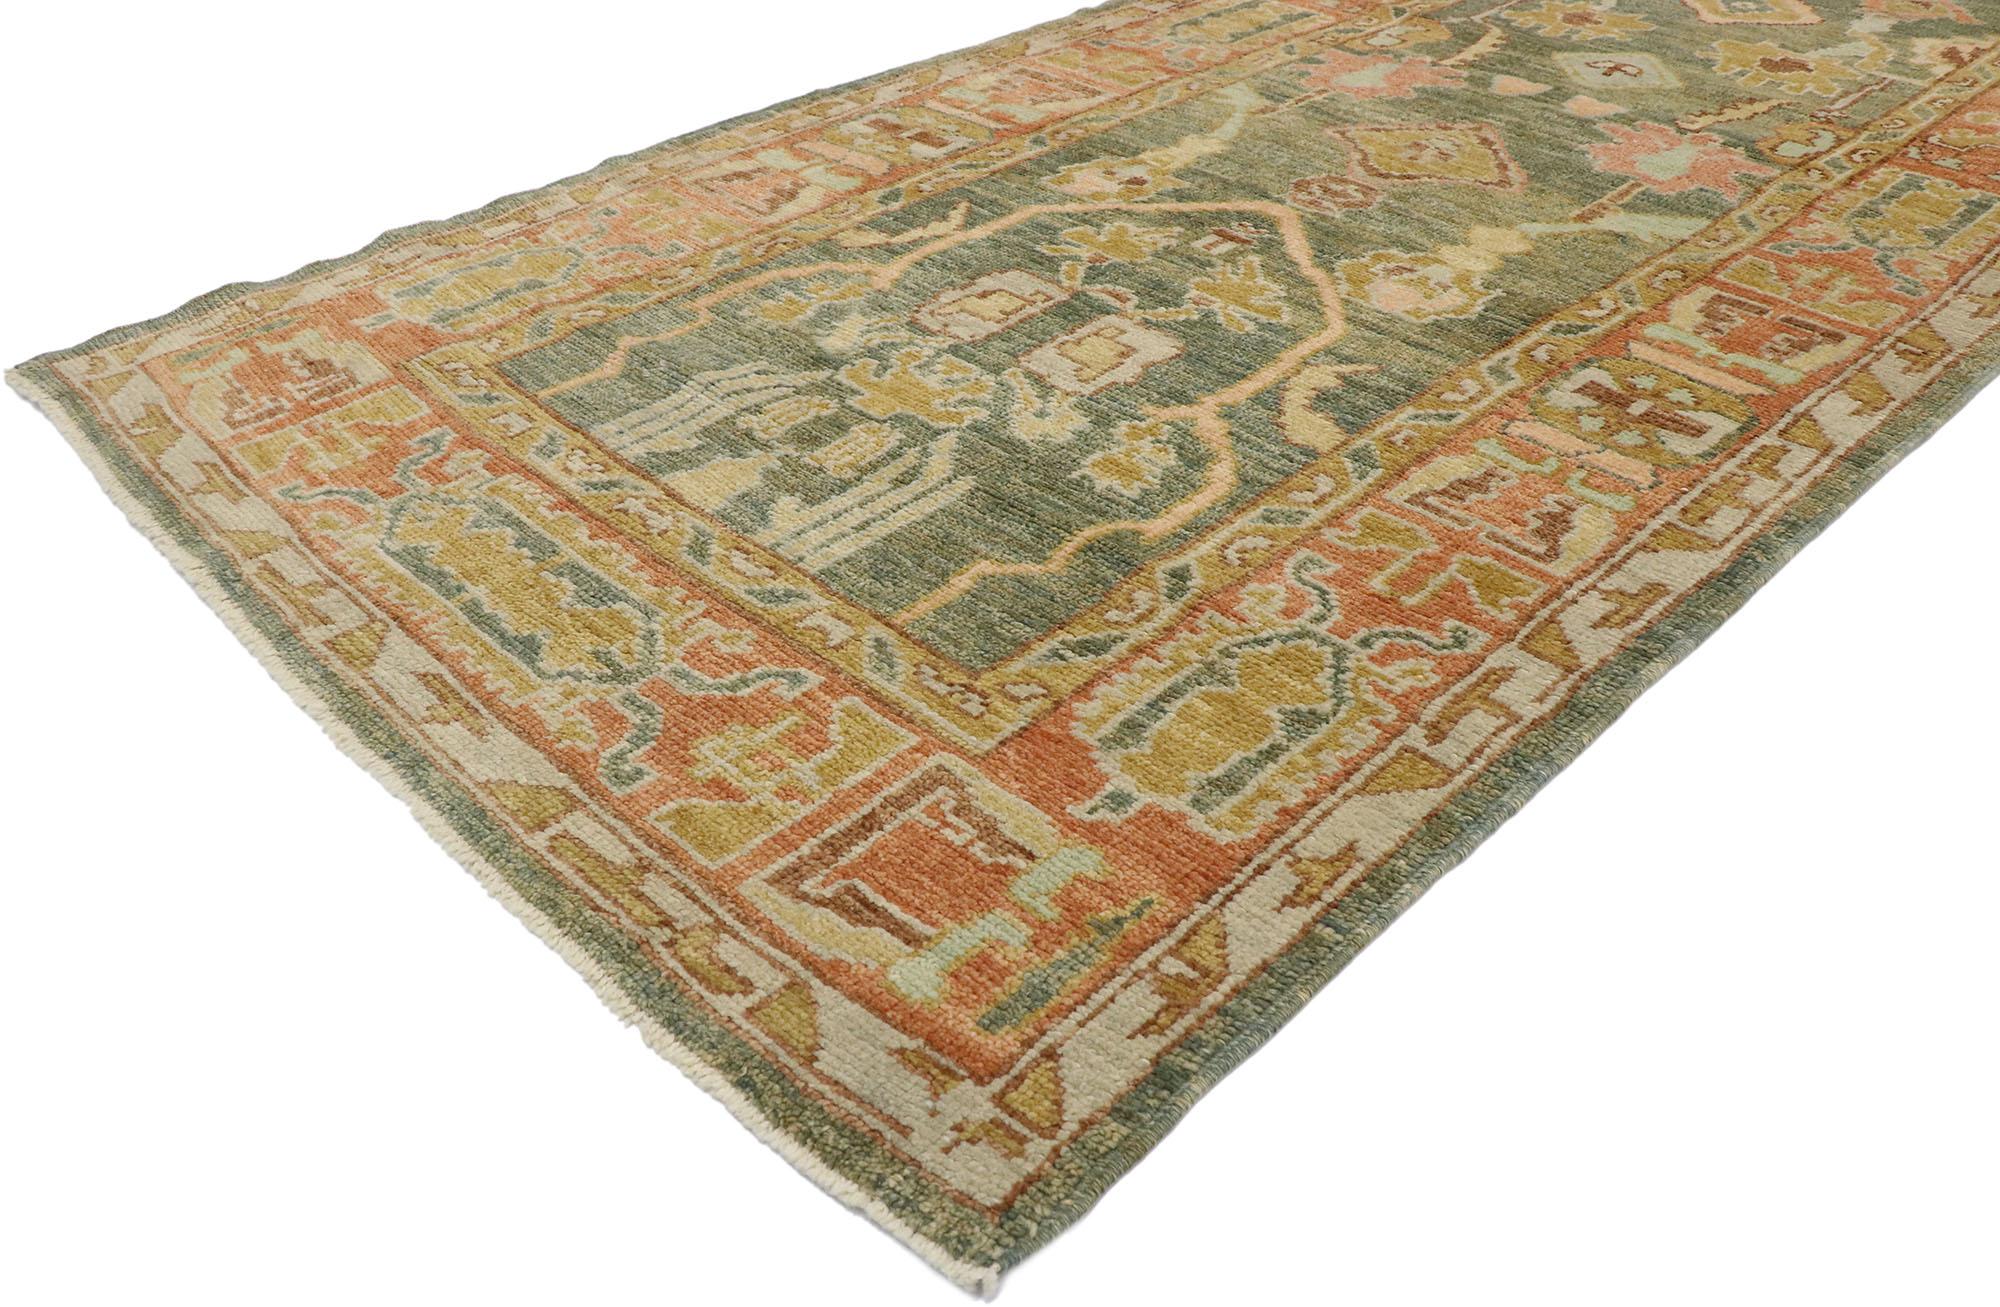 53385 New contemporary Turkish Oushak runner with modern Spanish Revival style. Displaying well-balanced asymmetry and eclectic refinement combined with timeless elegance of Spanish design aesthetics, this hand knotted wool new contemporary Turkish